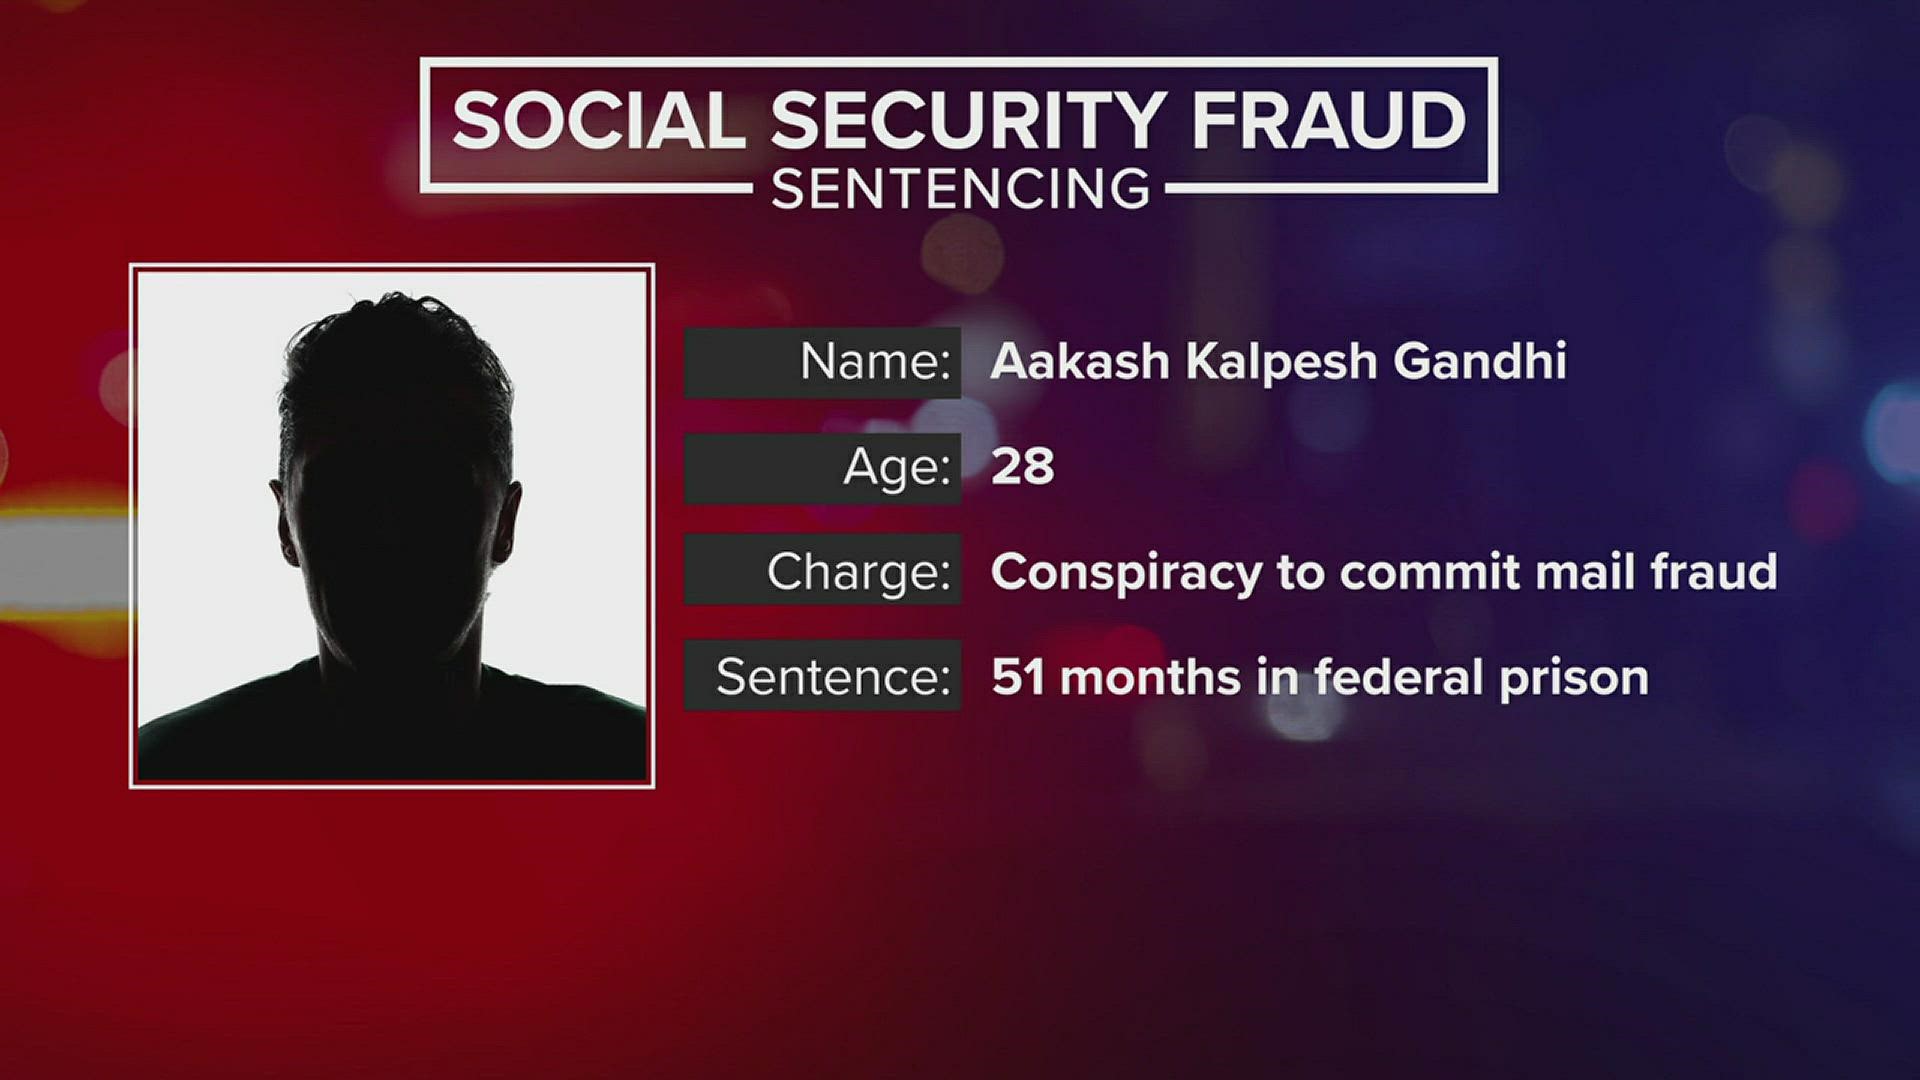 Federal agencies believe a large criminal operation based in India is targeting and stealing money from elderly Texans.